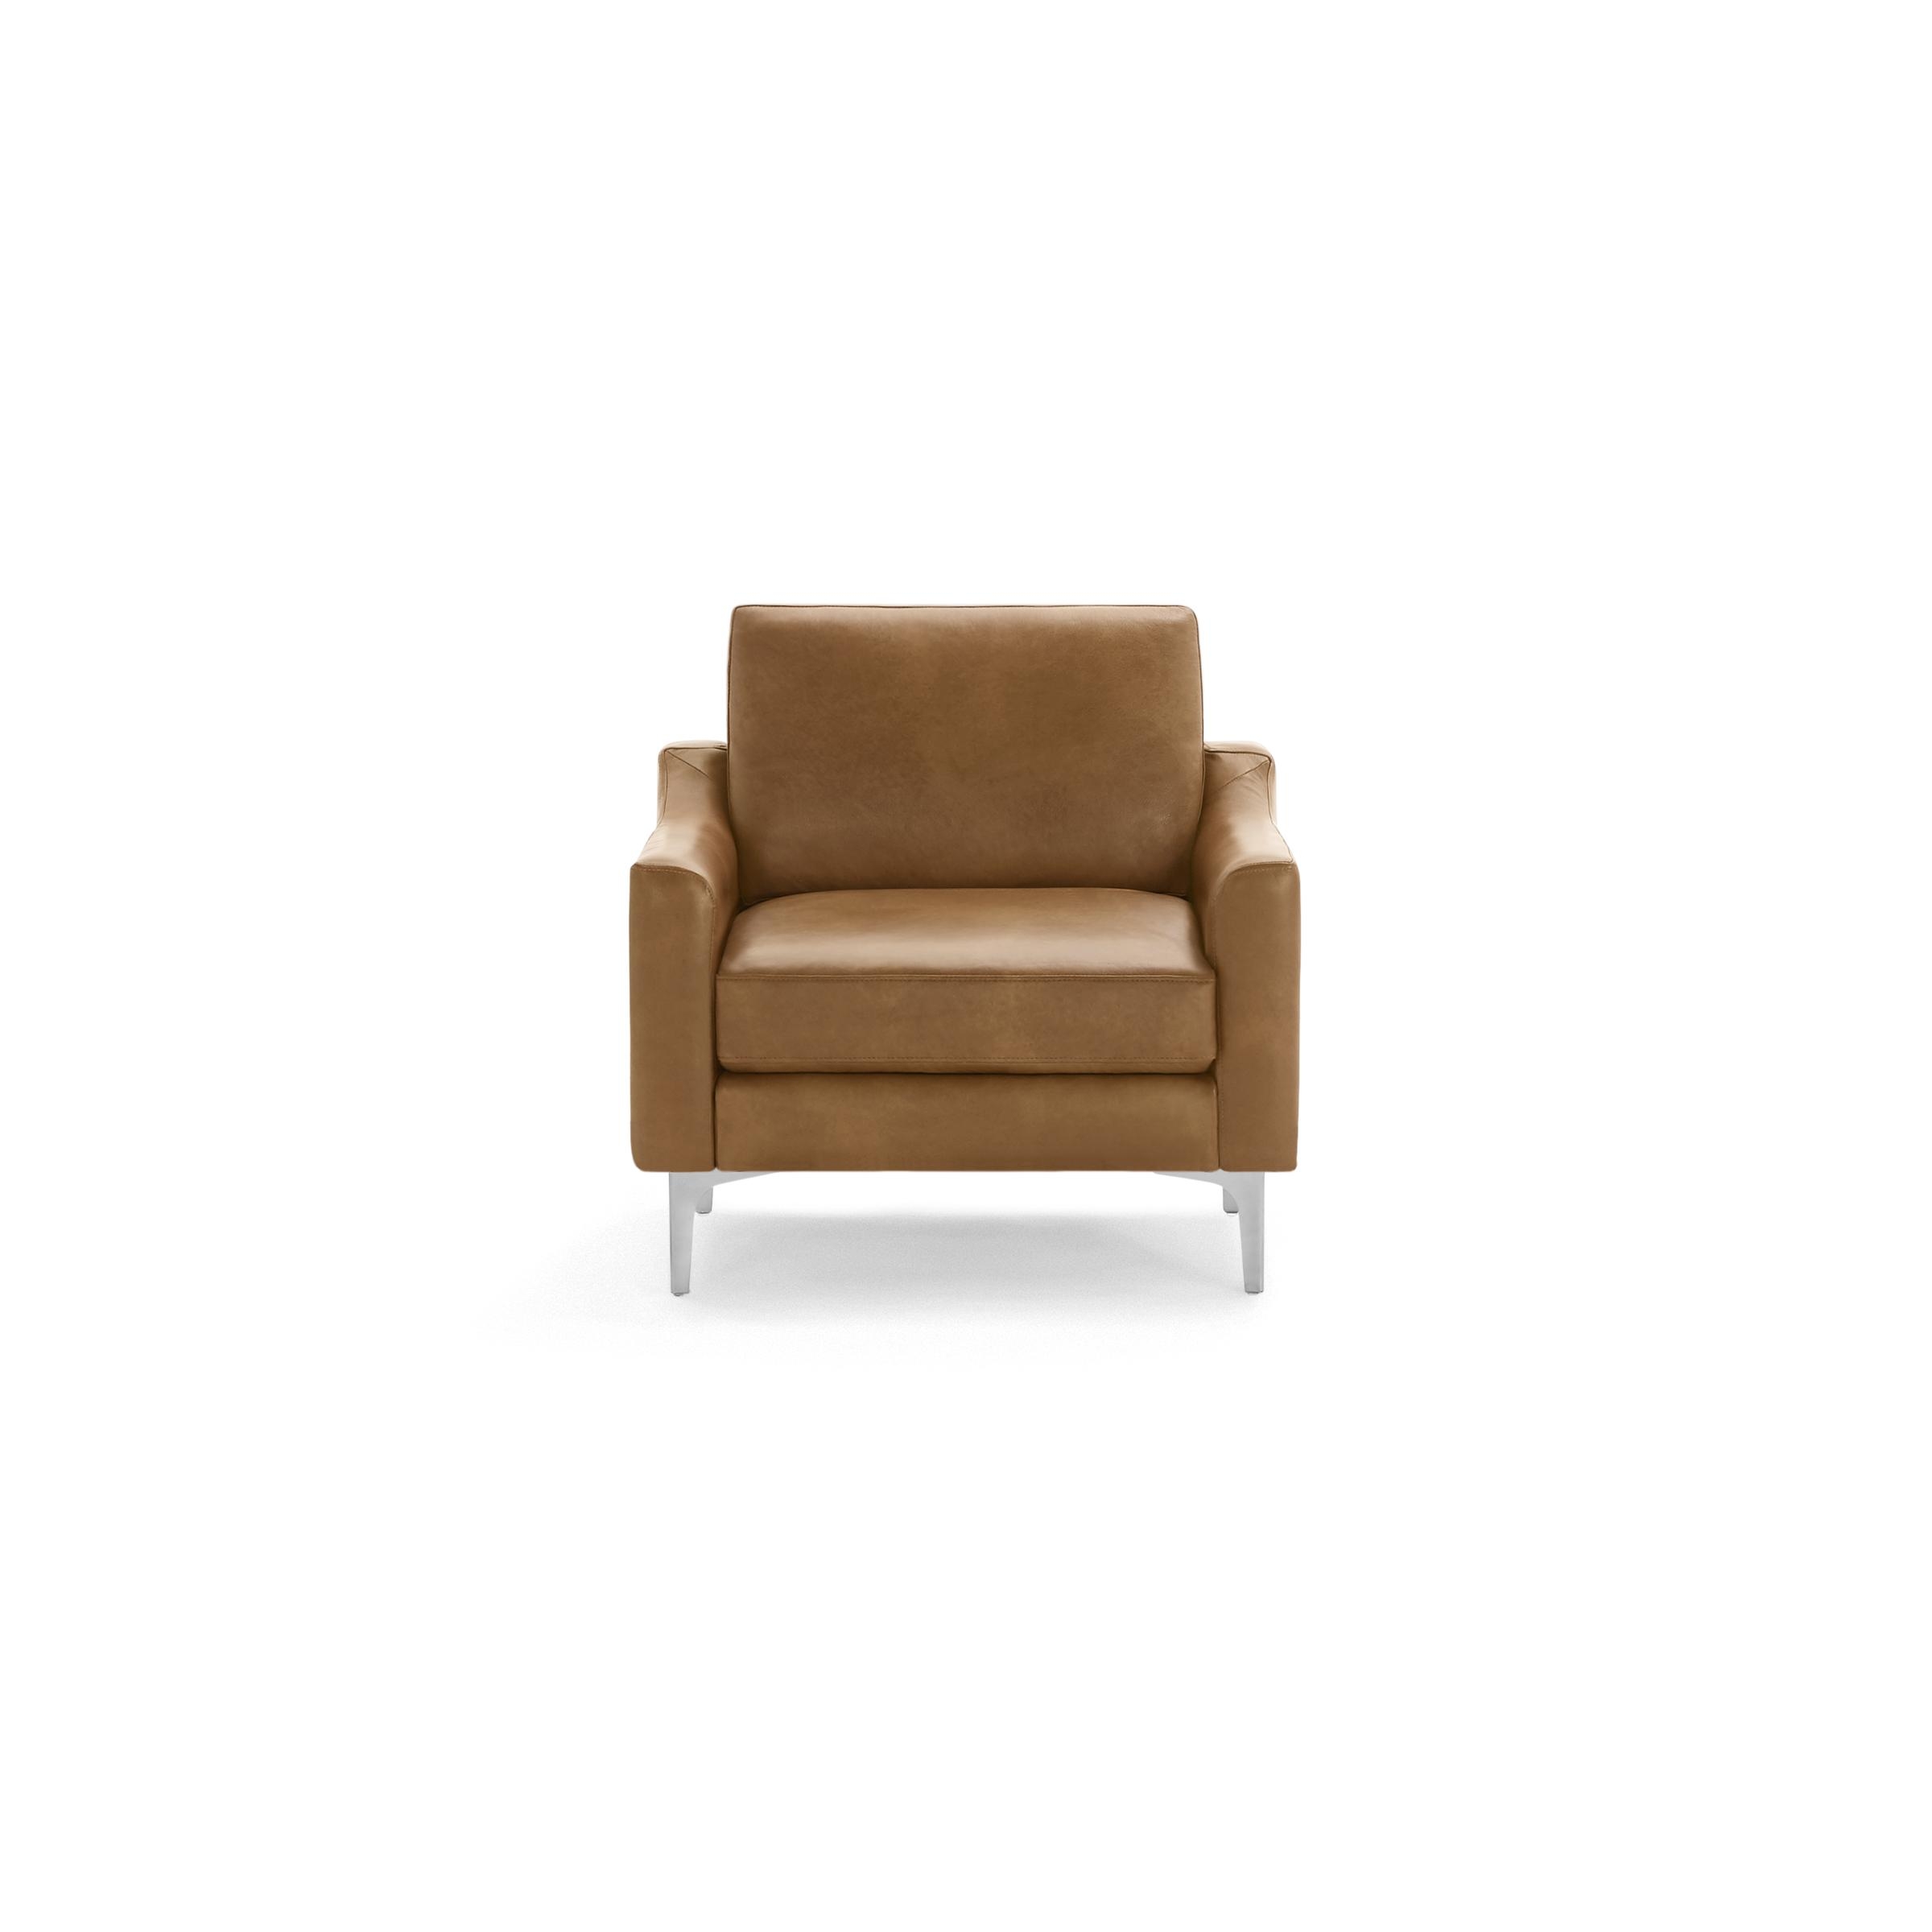 Nomad Leather Club Chair in Camel, Chrome Legs - Image 0